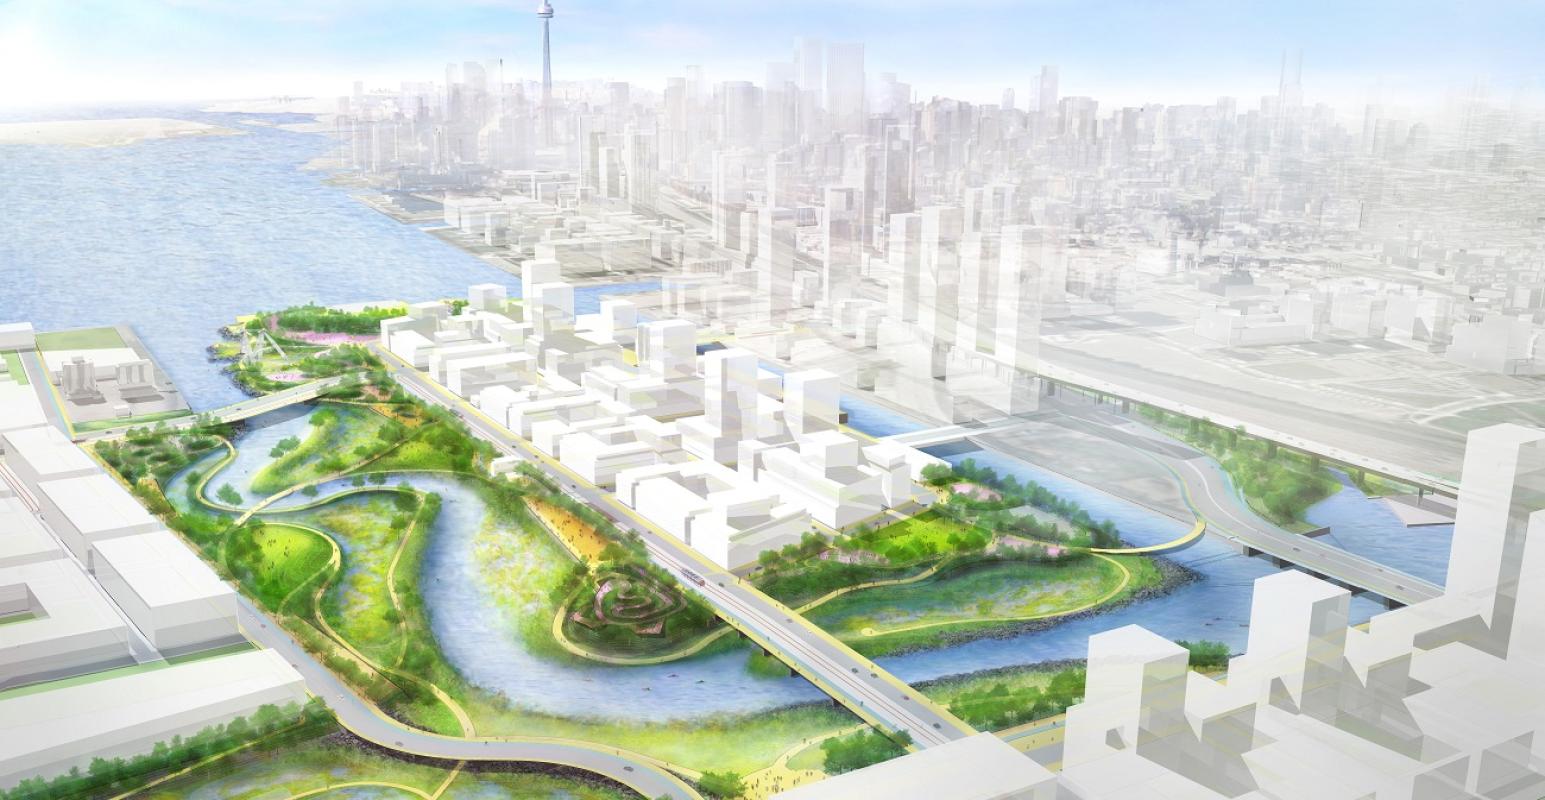 rendering showing plans for the revitalized Port Lands and mouth of the Don River